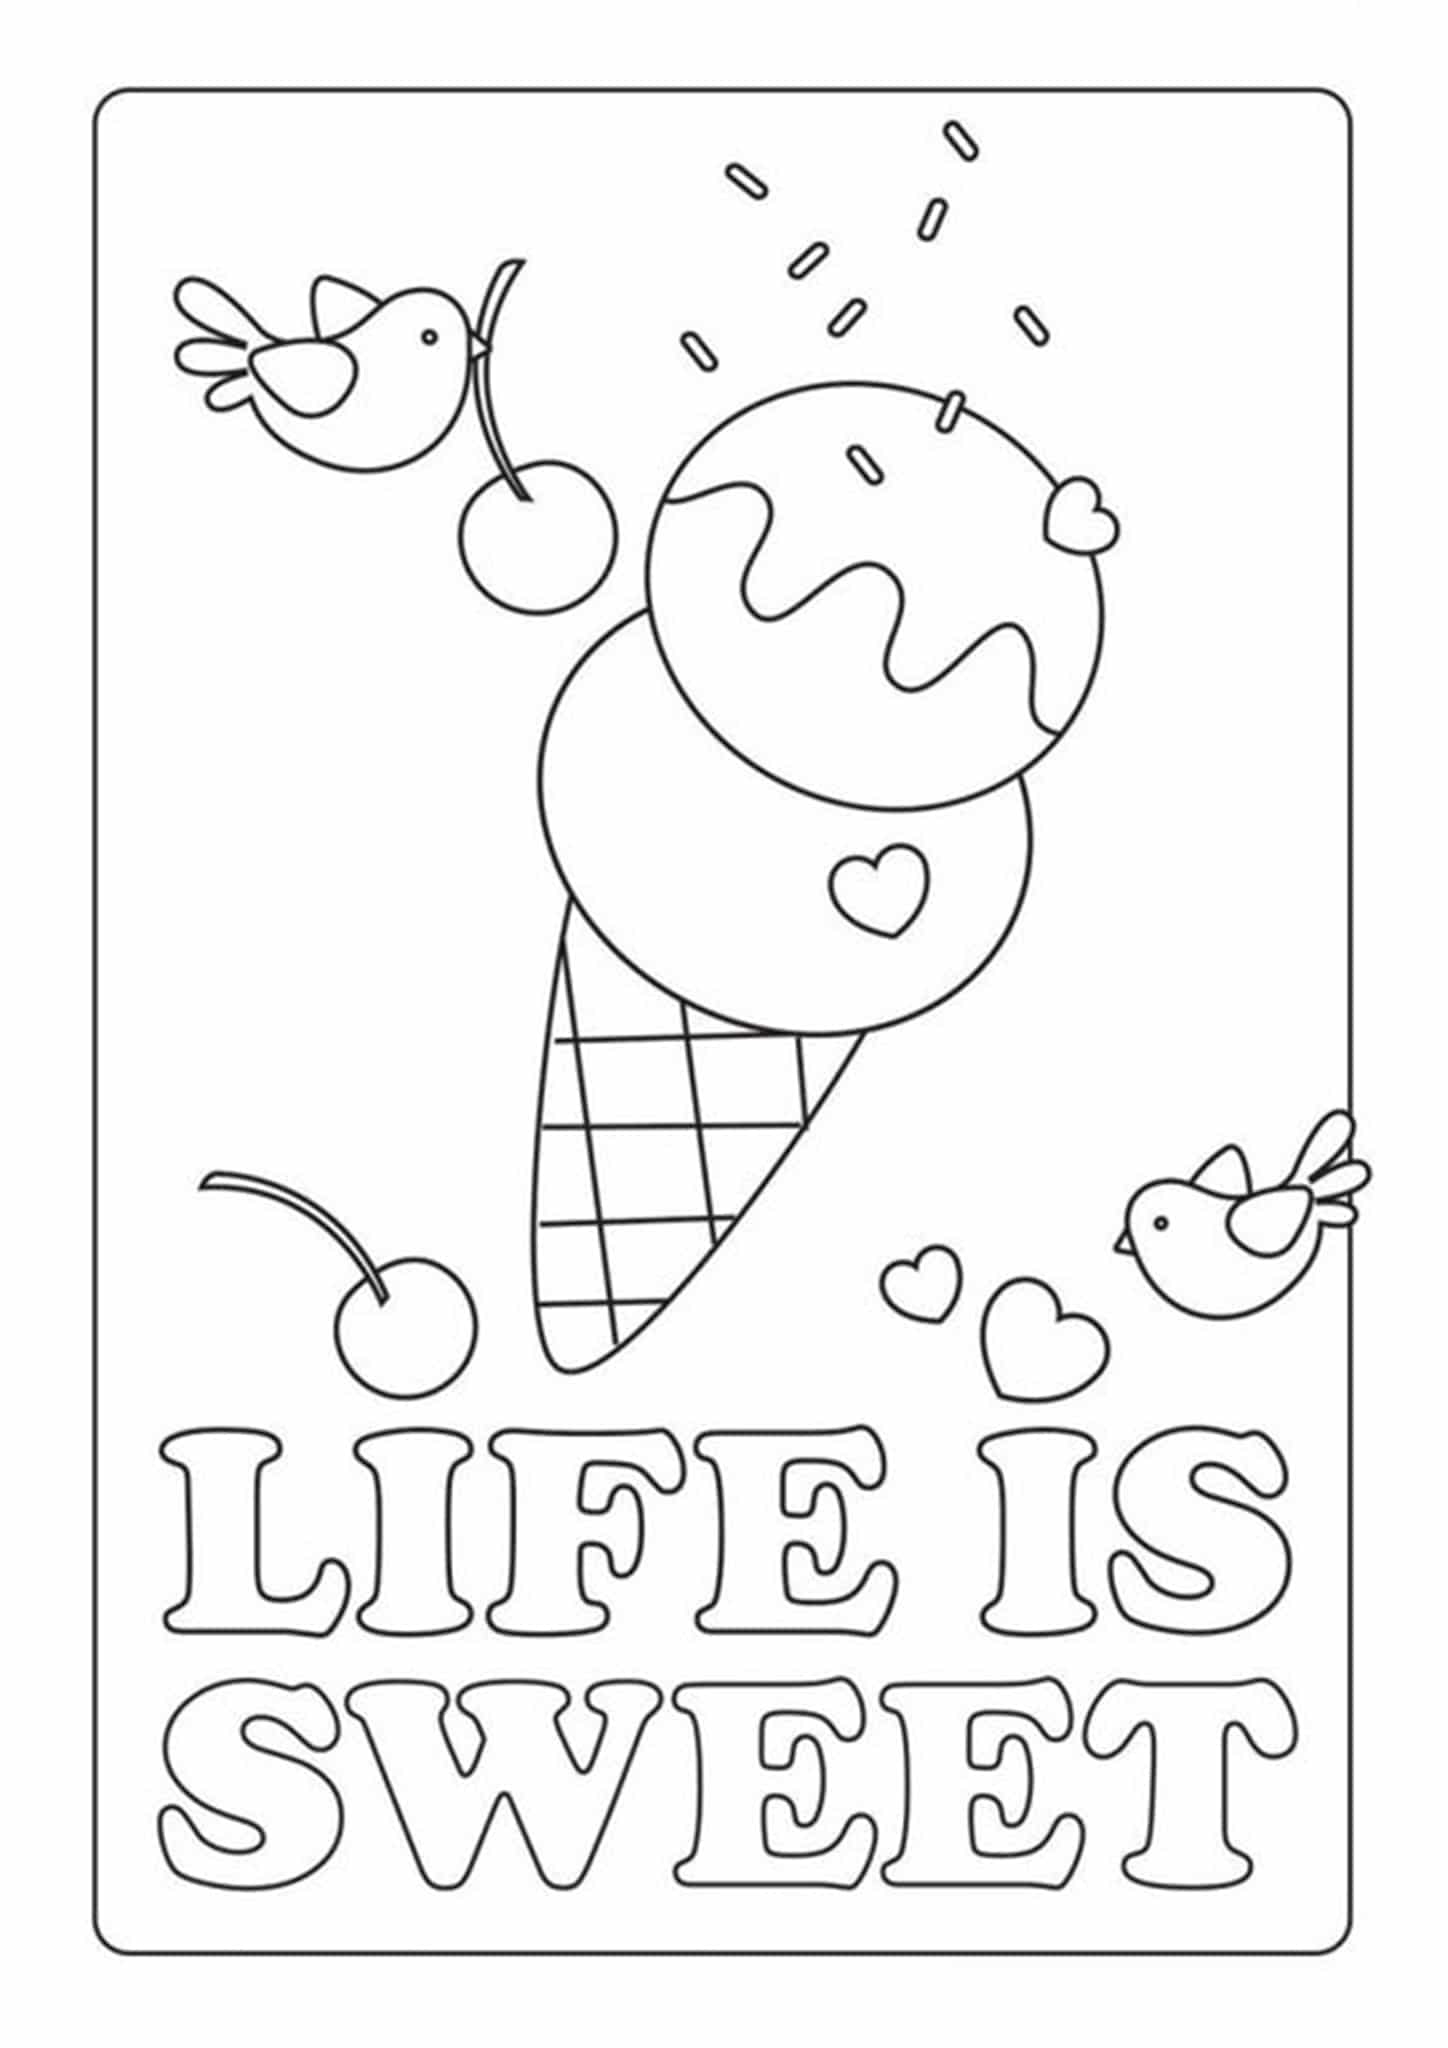 Download Free & Easy To Print Ice Cream Coloring Pages - Tulamama